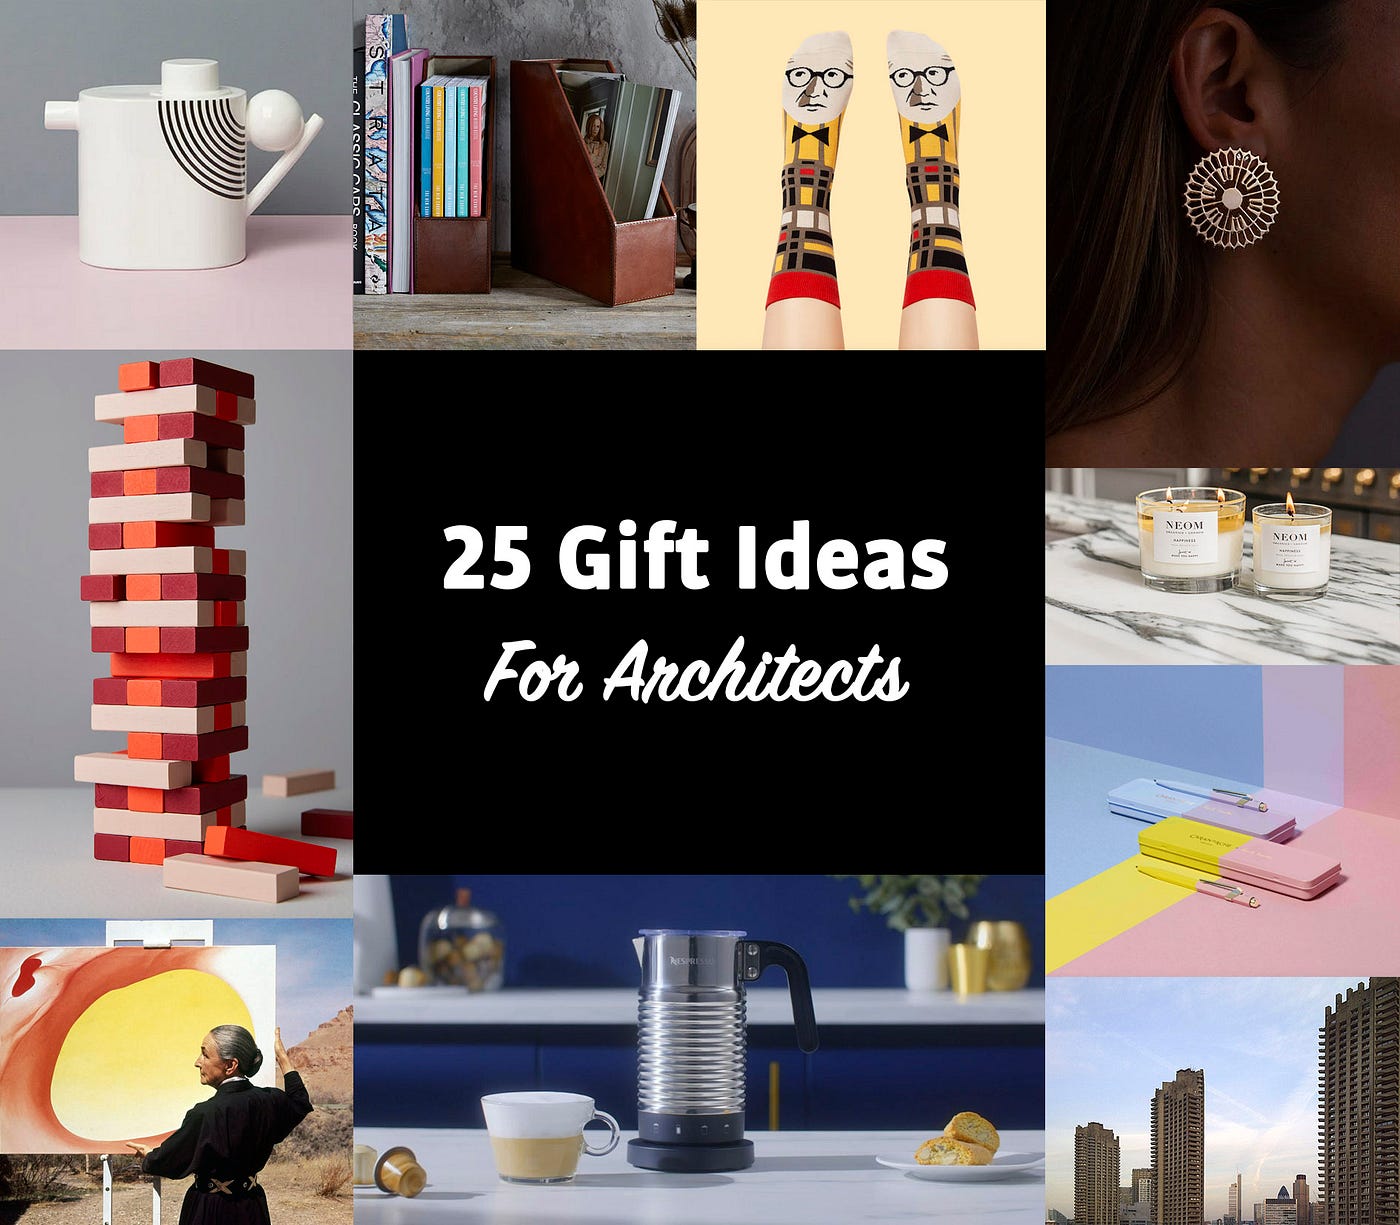 11 gifts for architecture buffs - The Spaces